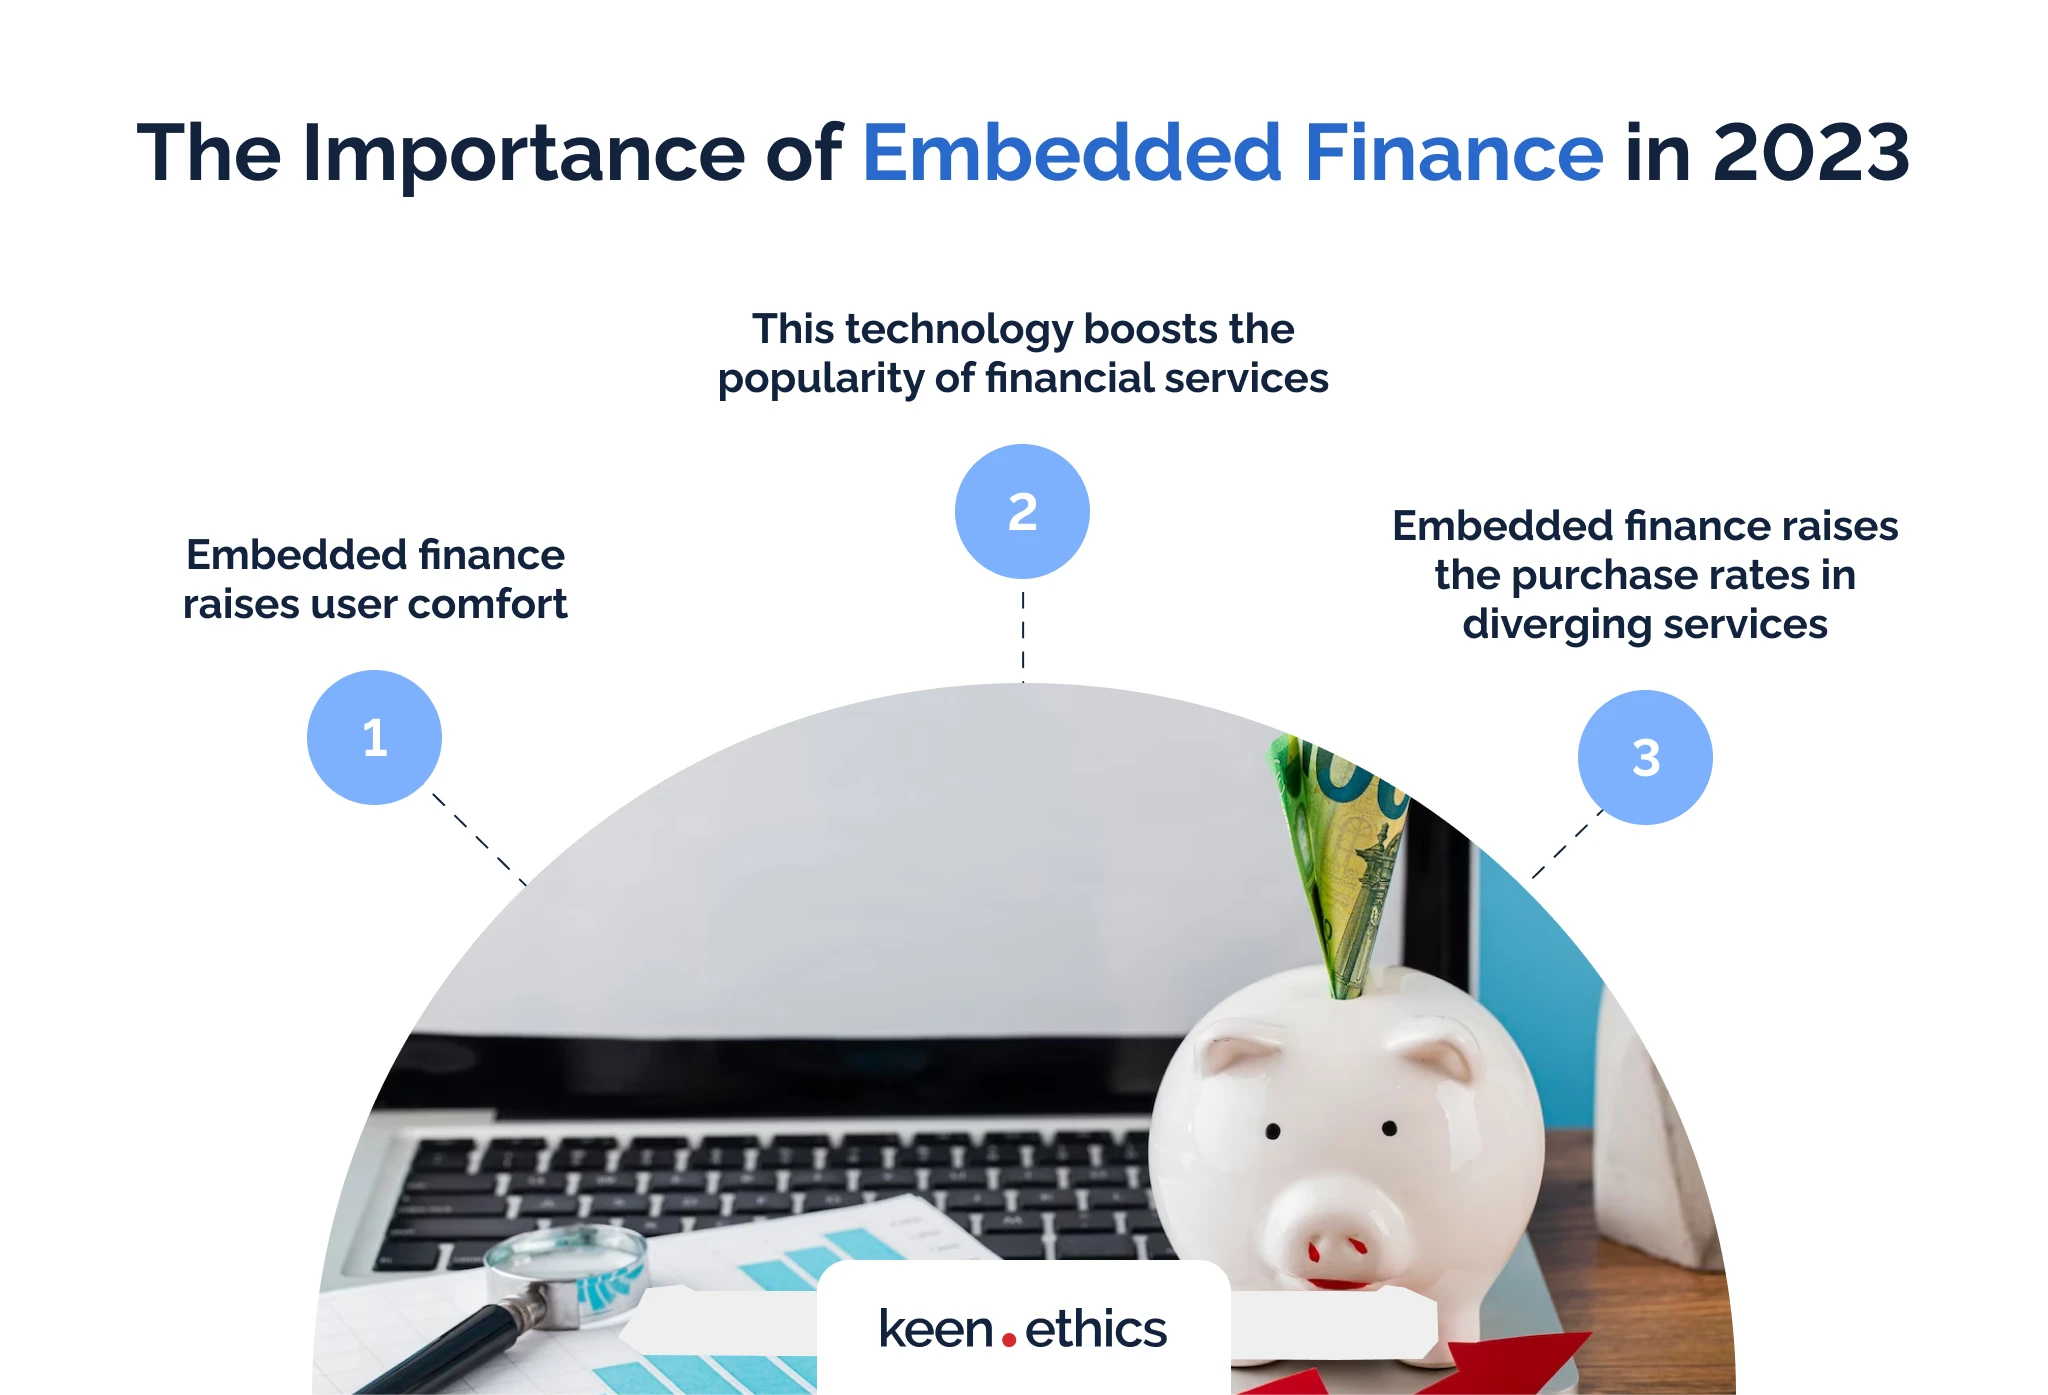 The importance of embedded finance